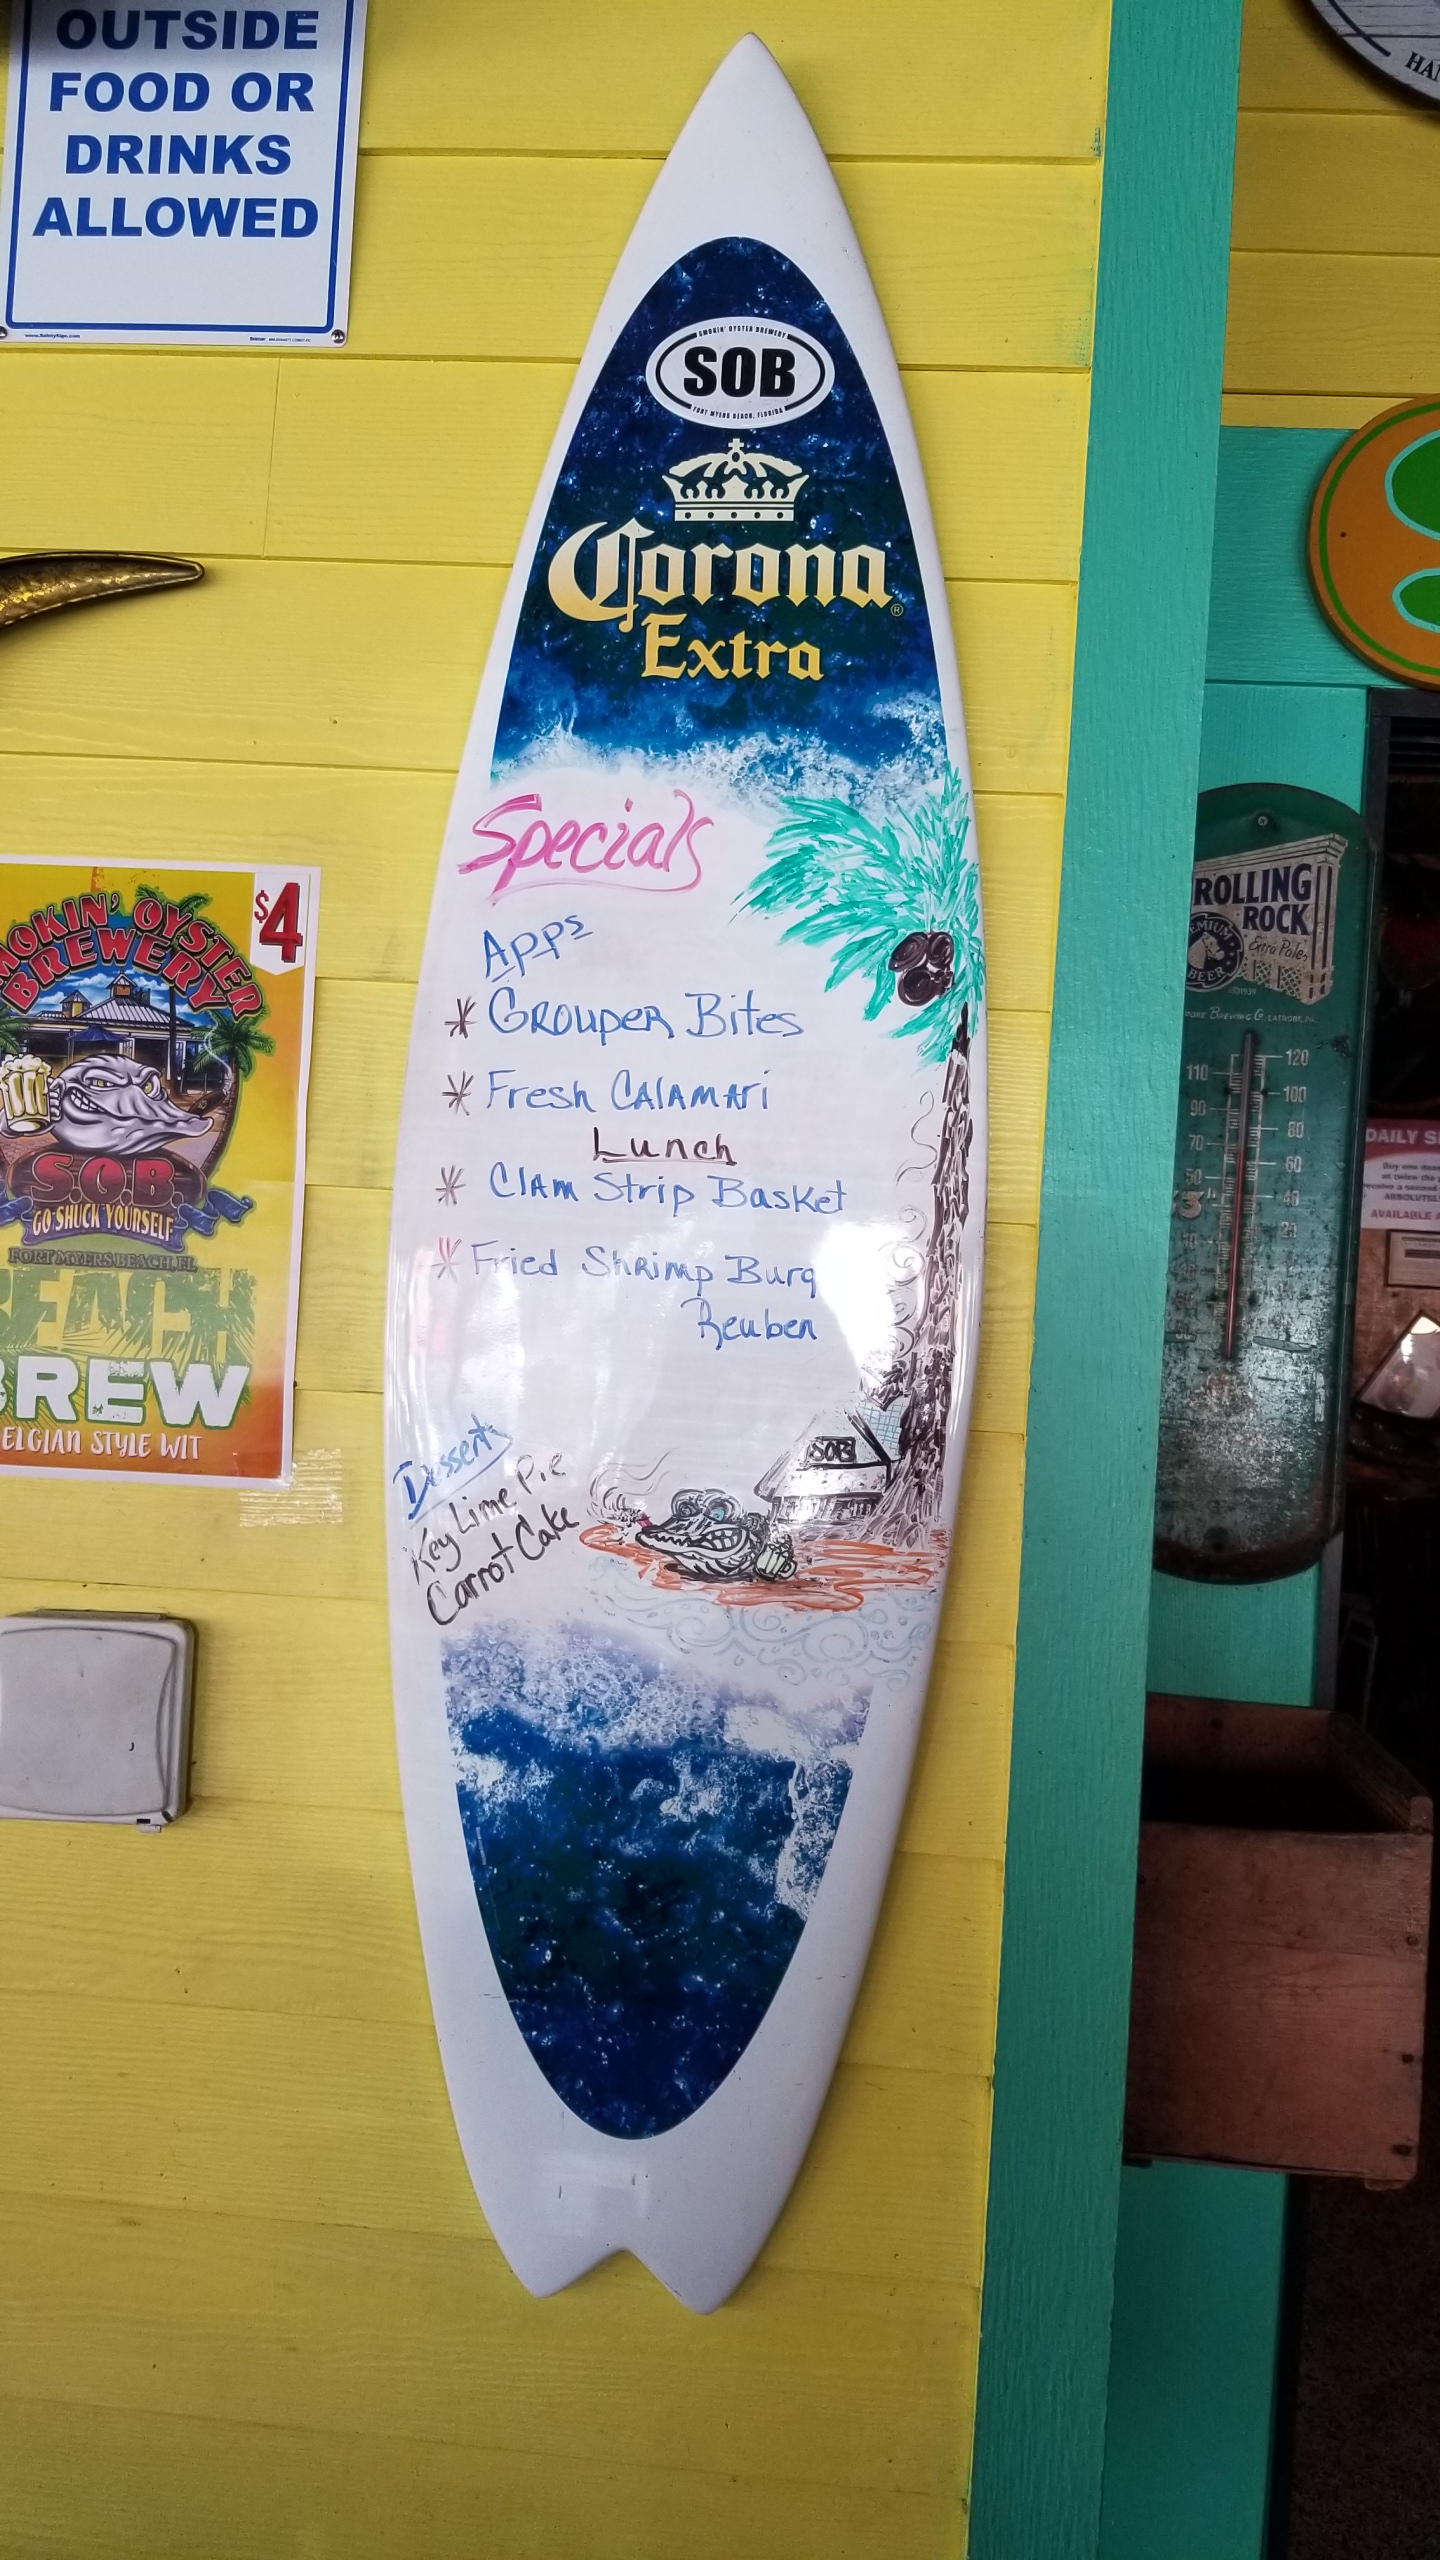 SOB-Daily Food Specials written on surfboard